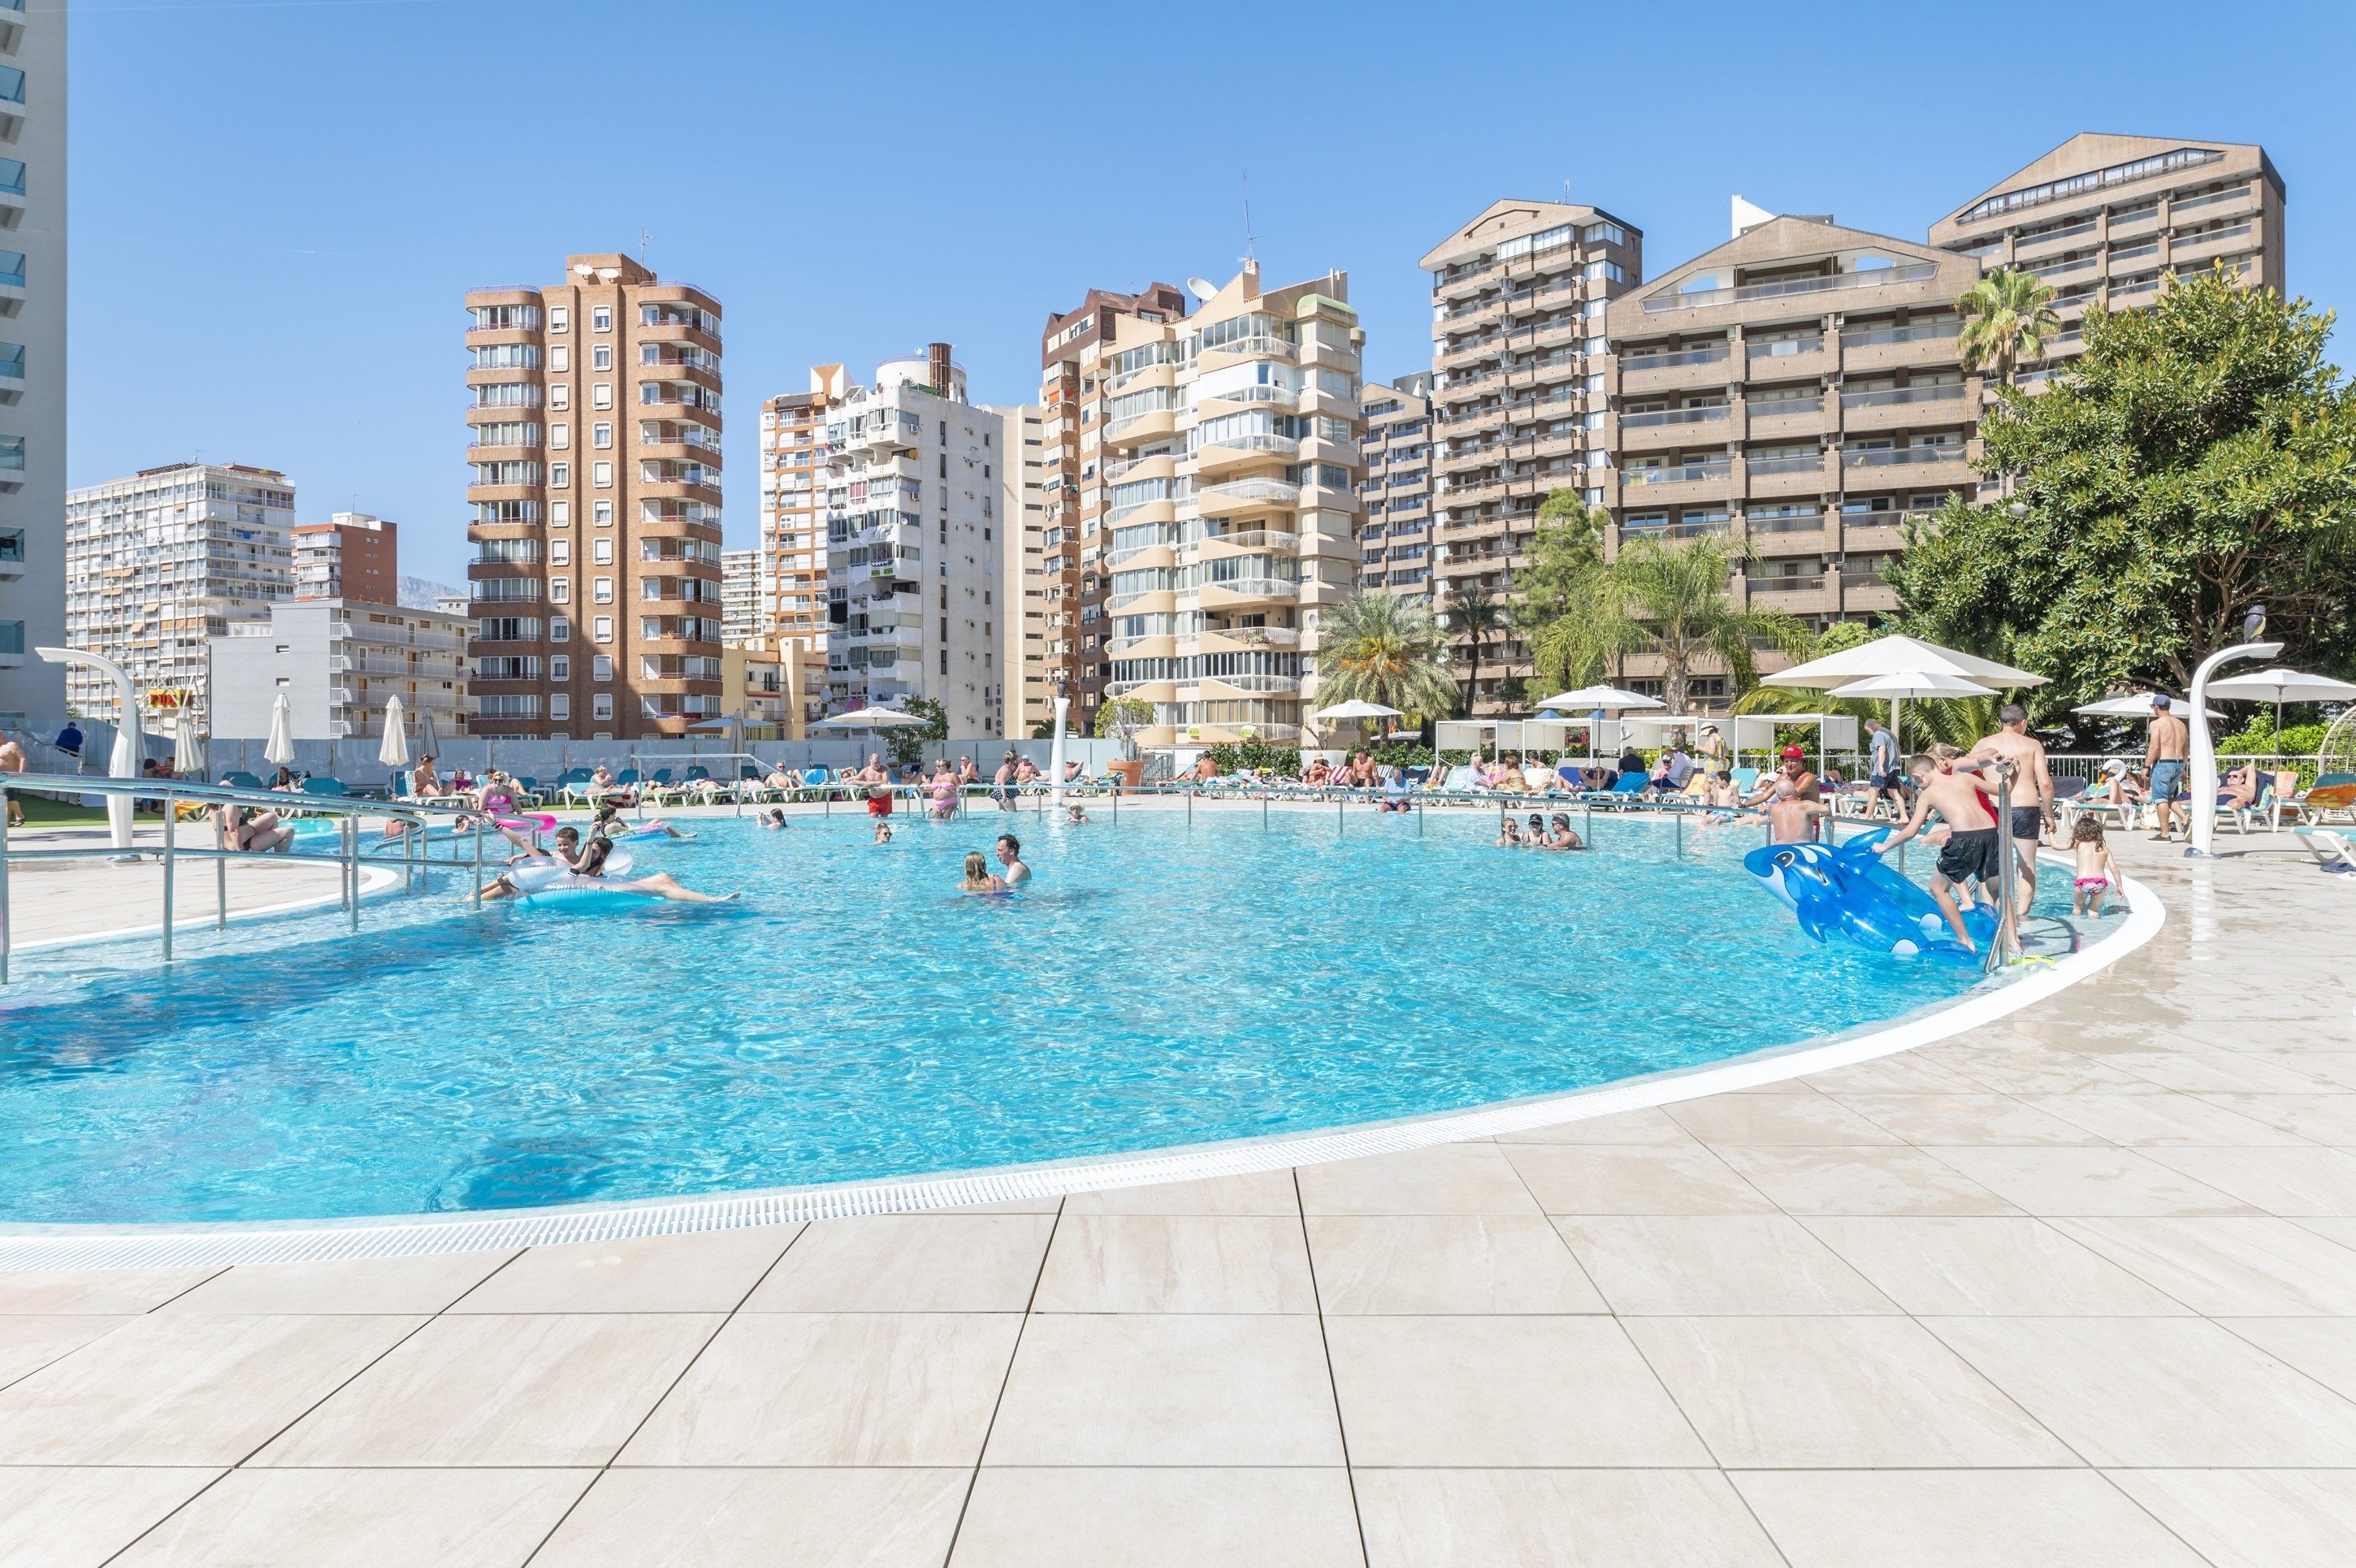 a large swimming pool surrounded by tall buildings on a sunny day